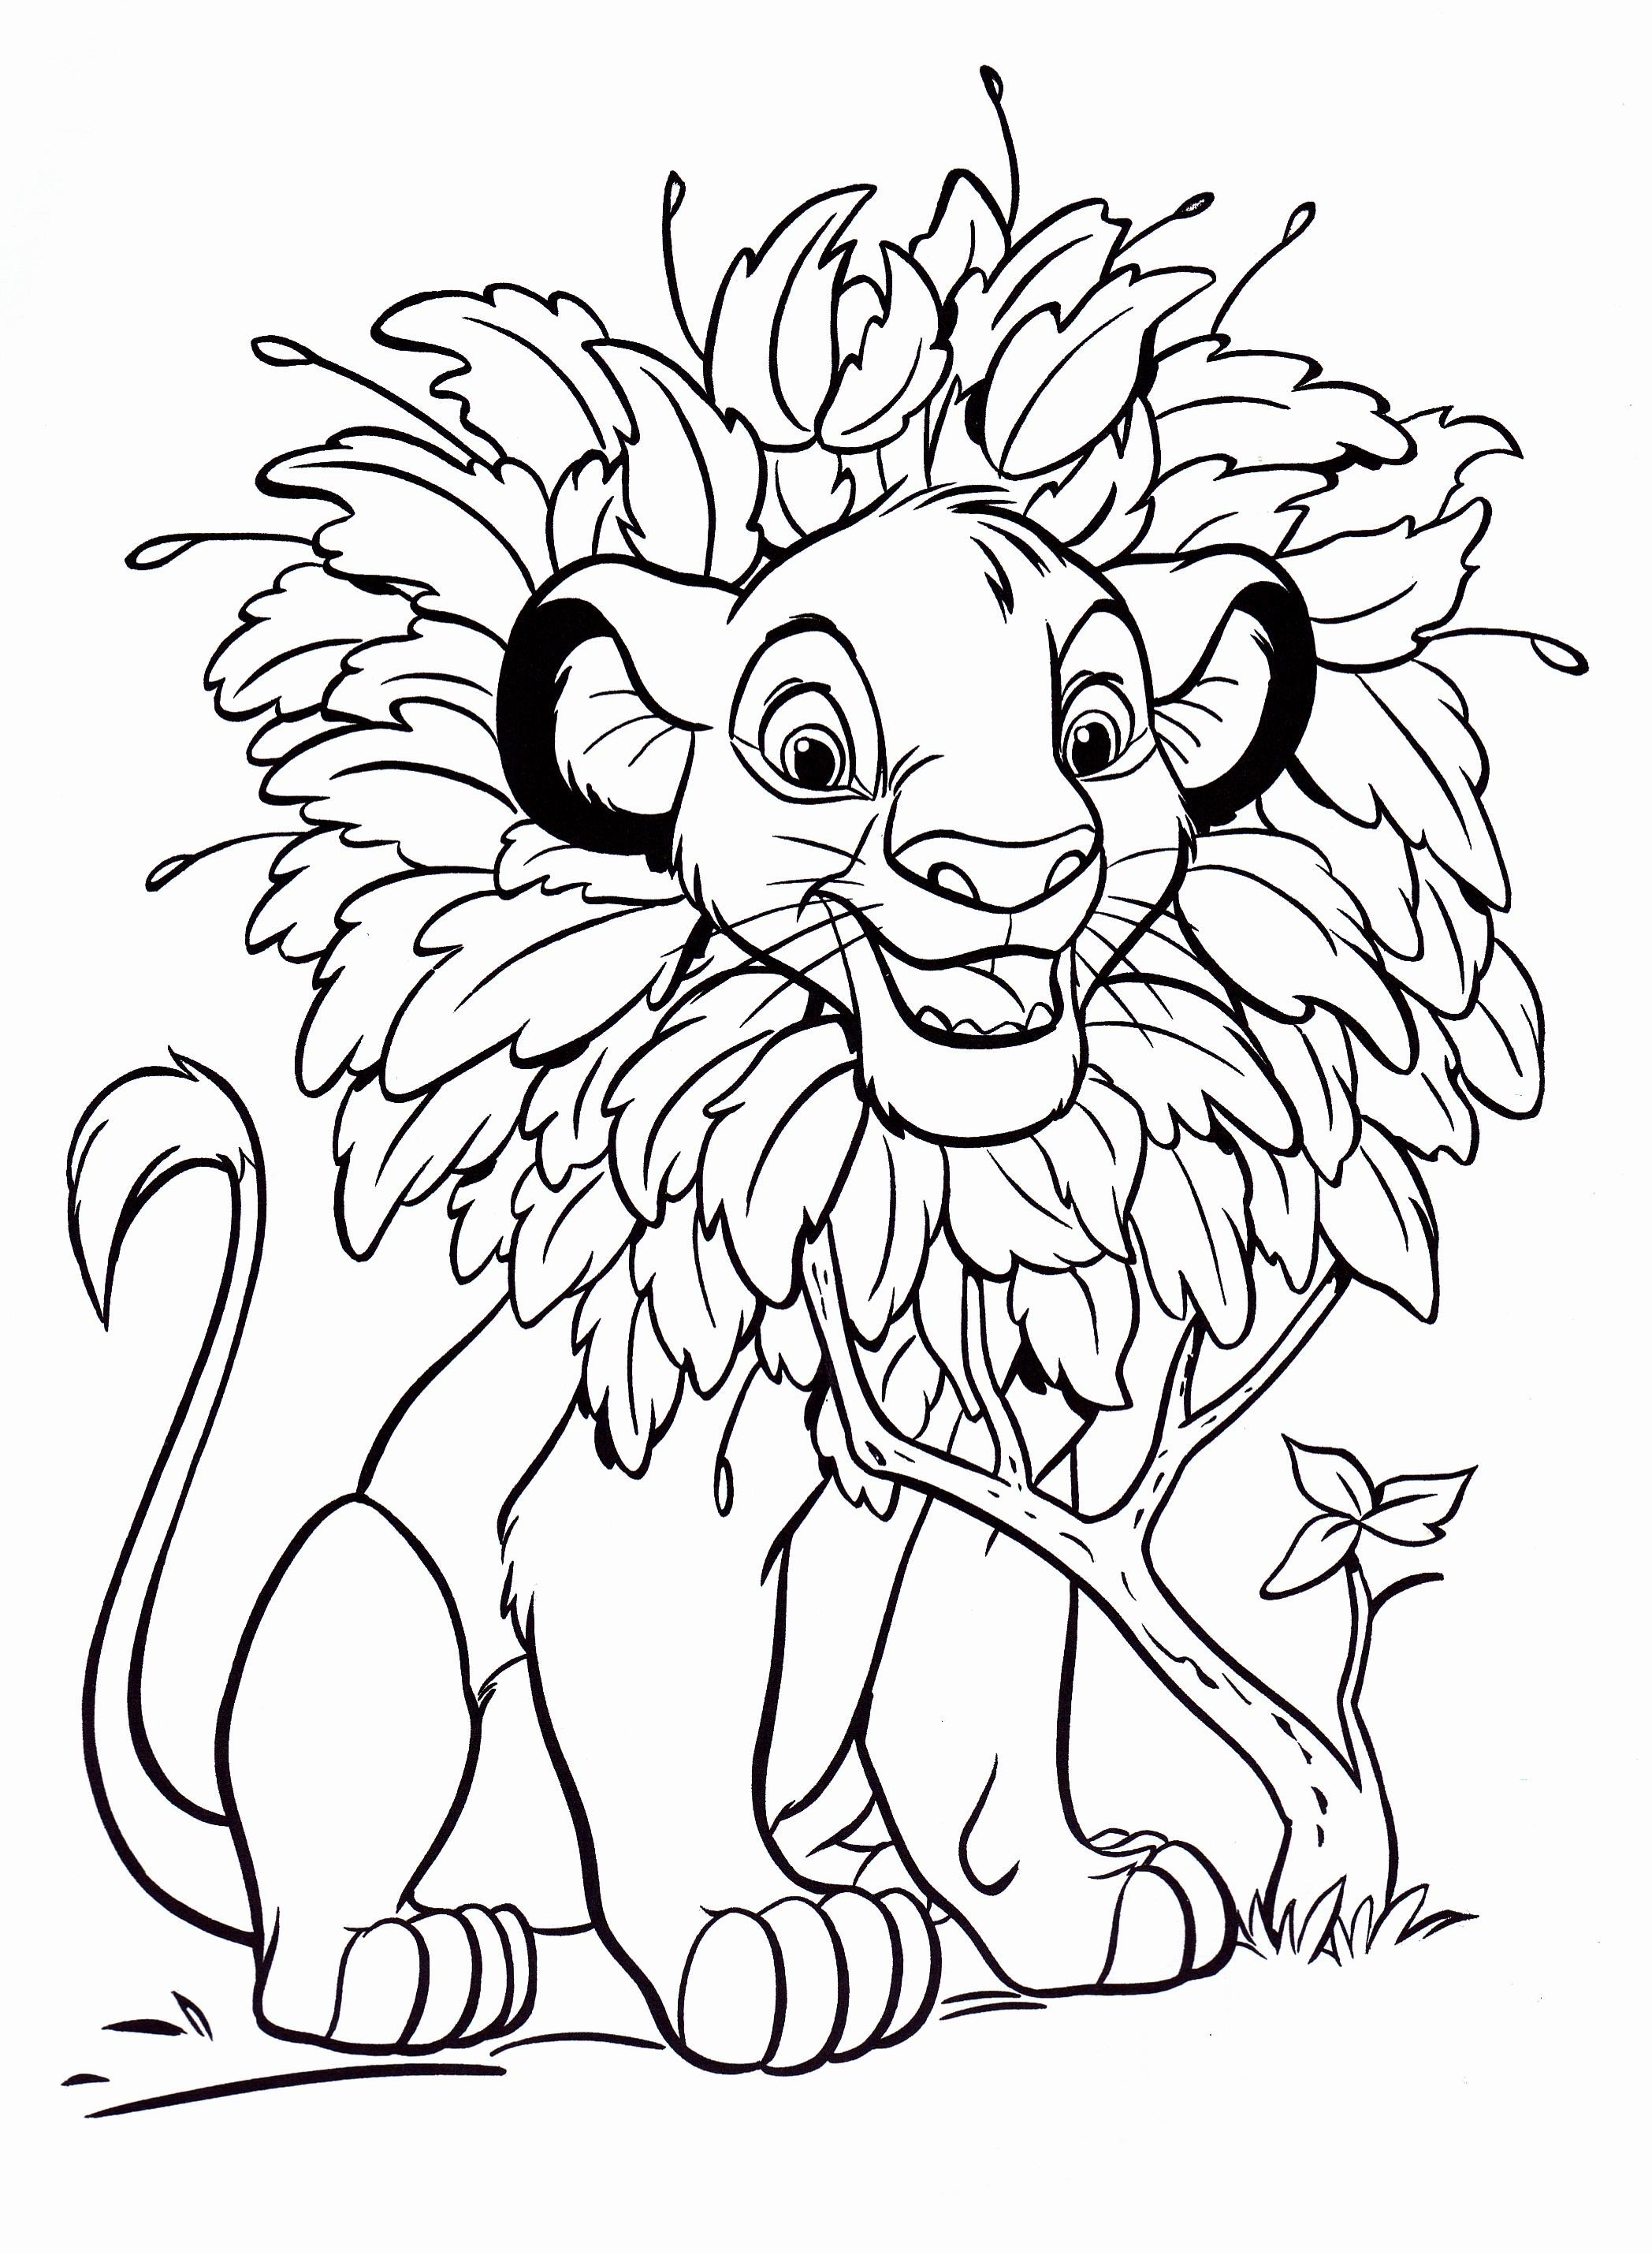 Free Coloring Book Pages For Toddlers
 Free Coloring Pages Disney For Kids Image 58 Gianfreda